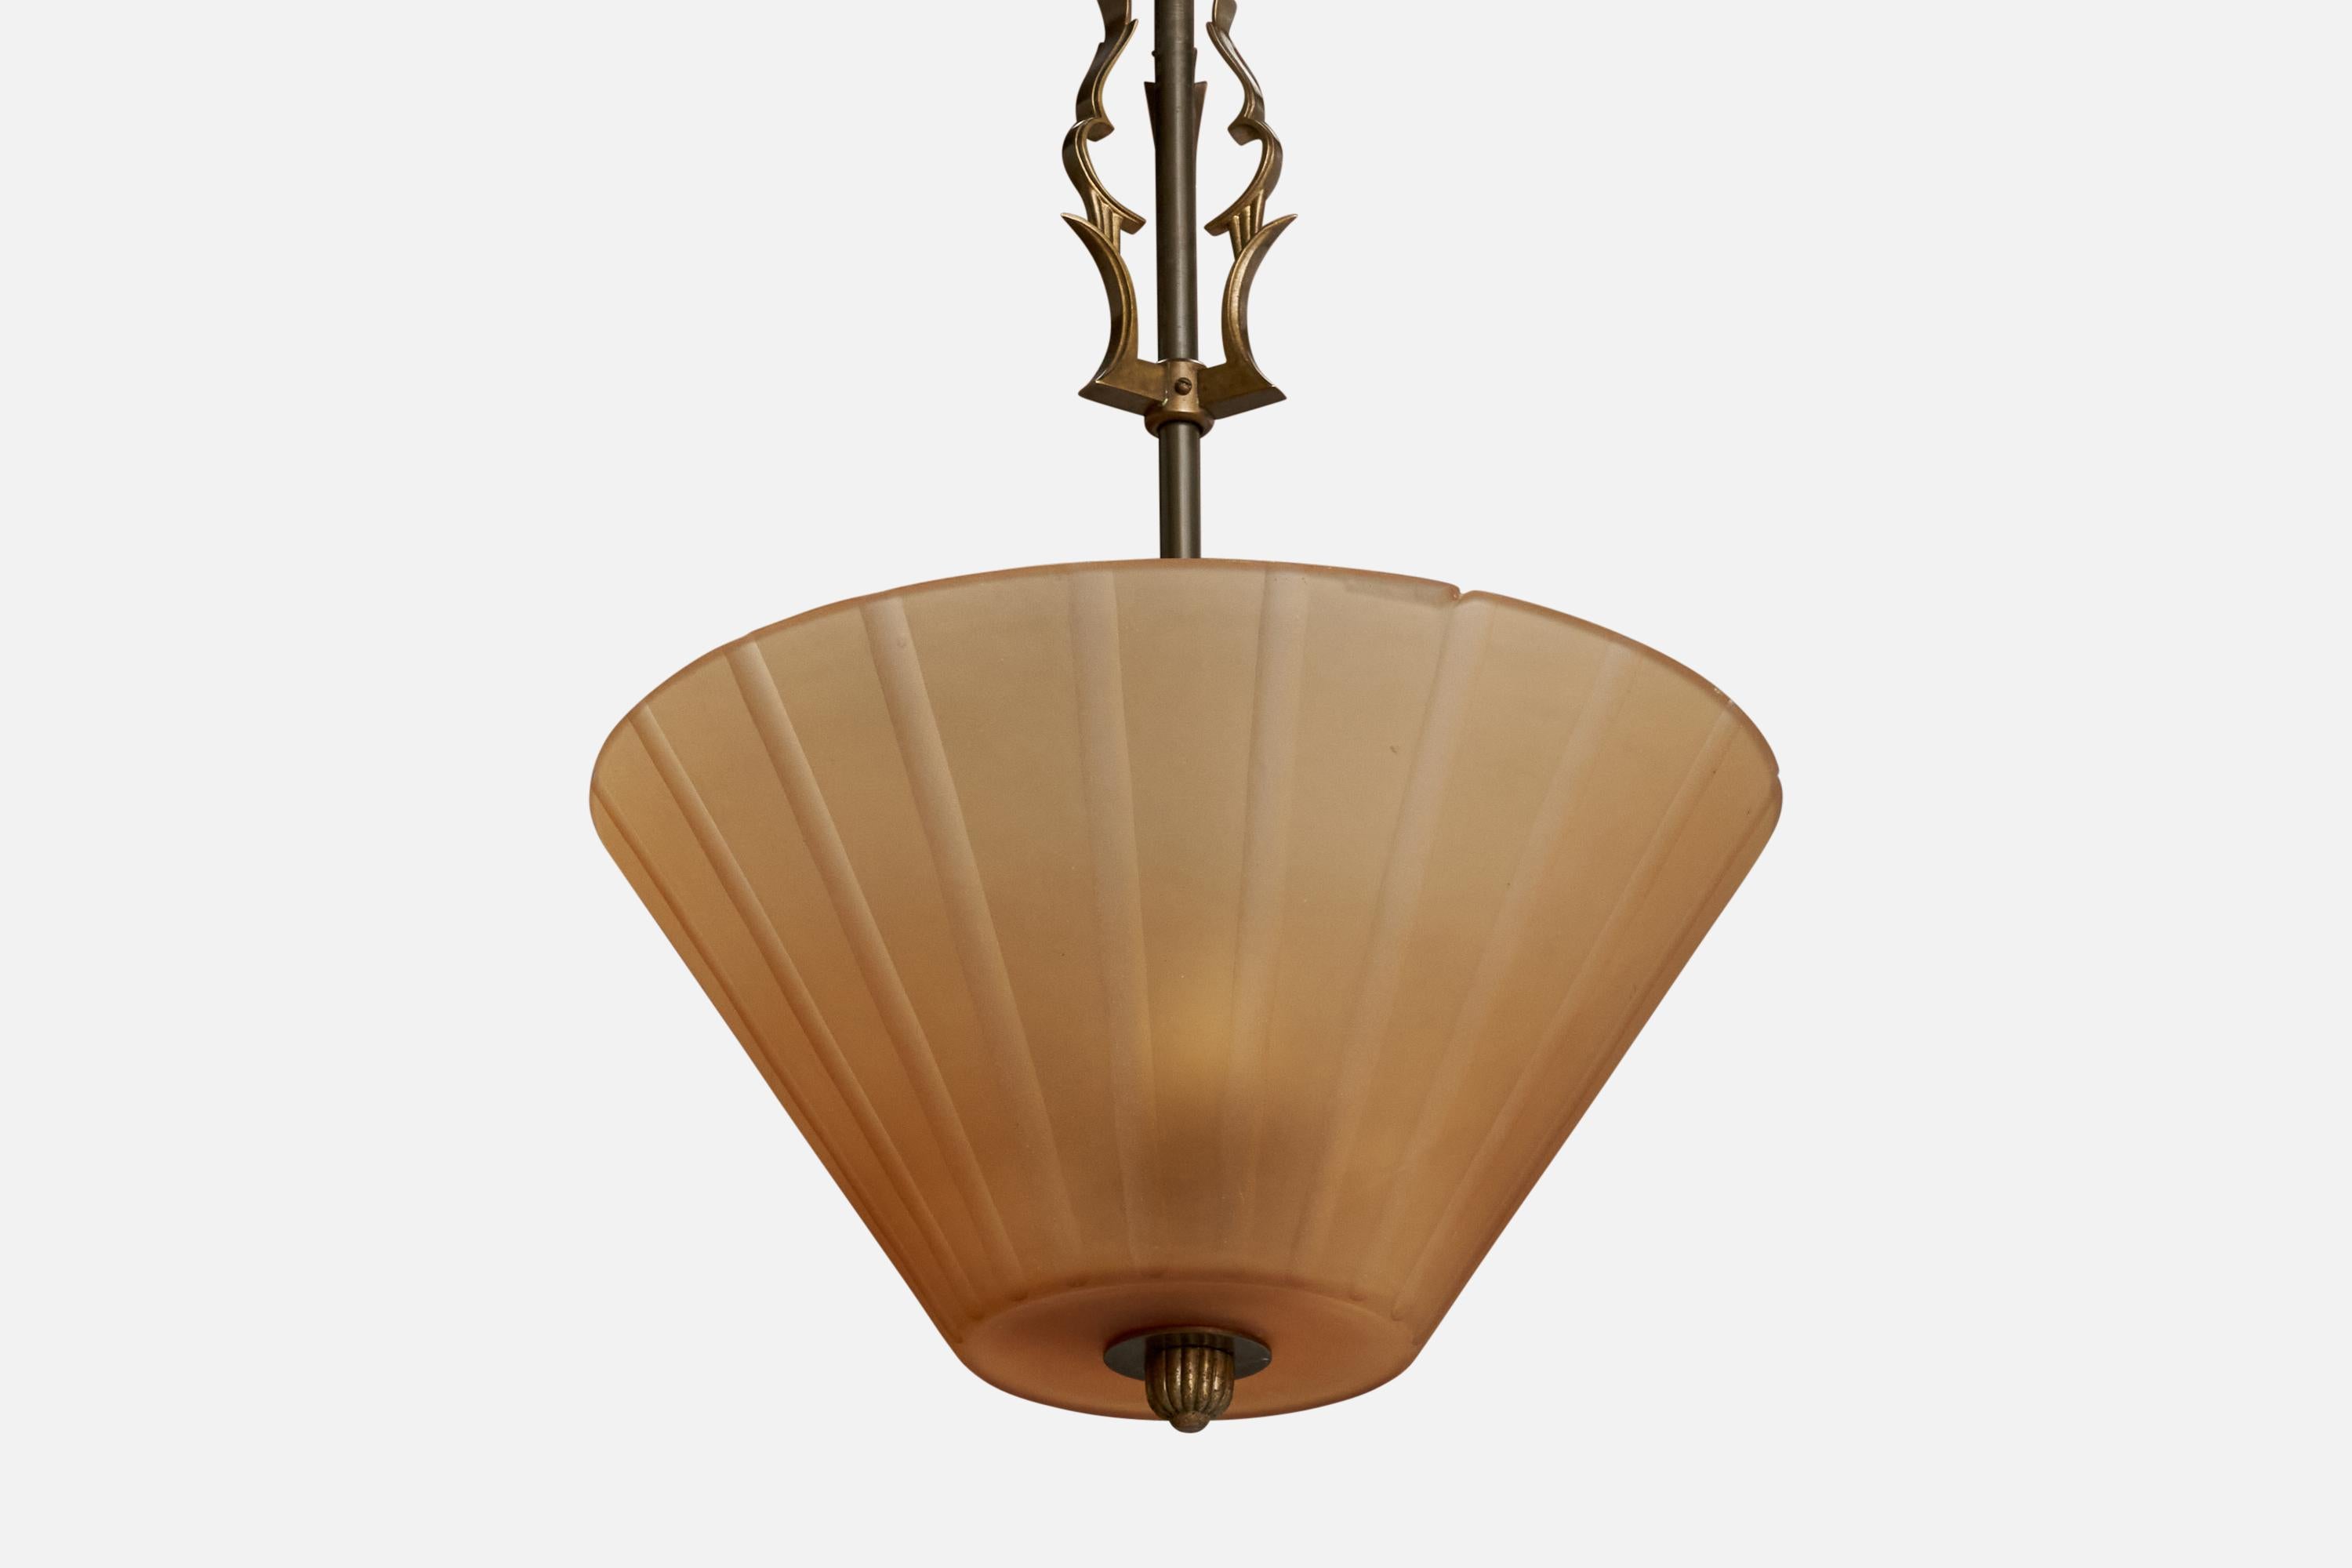 A brass and glass pendant light designed and produced in Sweden, 1930s.

Dimensions of canopy (inches): 4.41” H x 3.34” Diameter
Socket takes standard E-26 bulbs. 2 socket.There is no maximum wattage stated on the fixture. All lighting will be